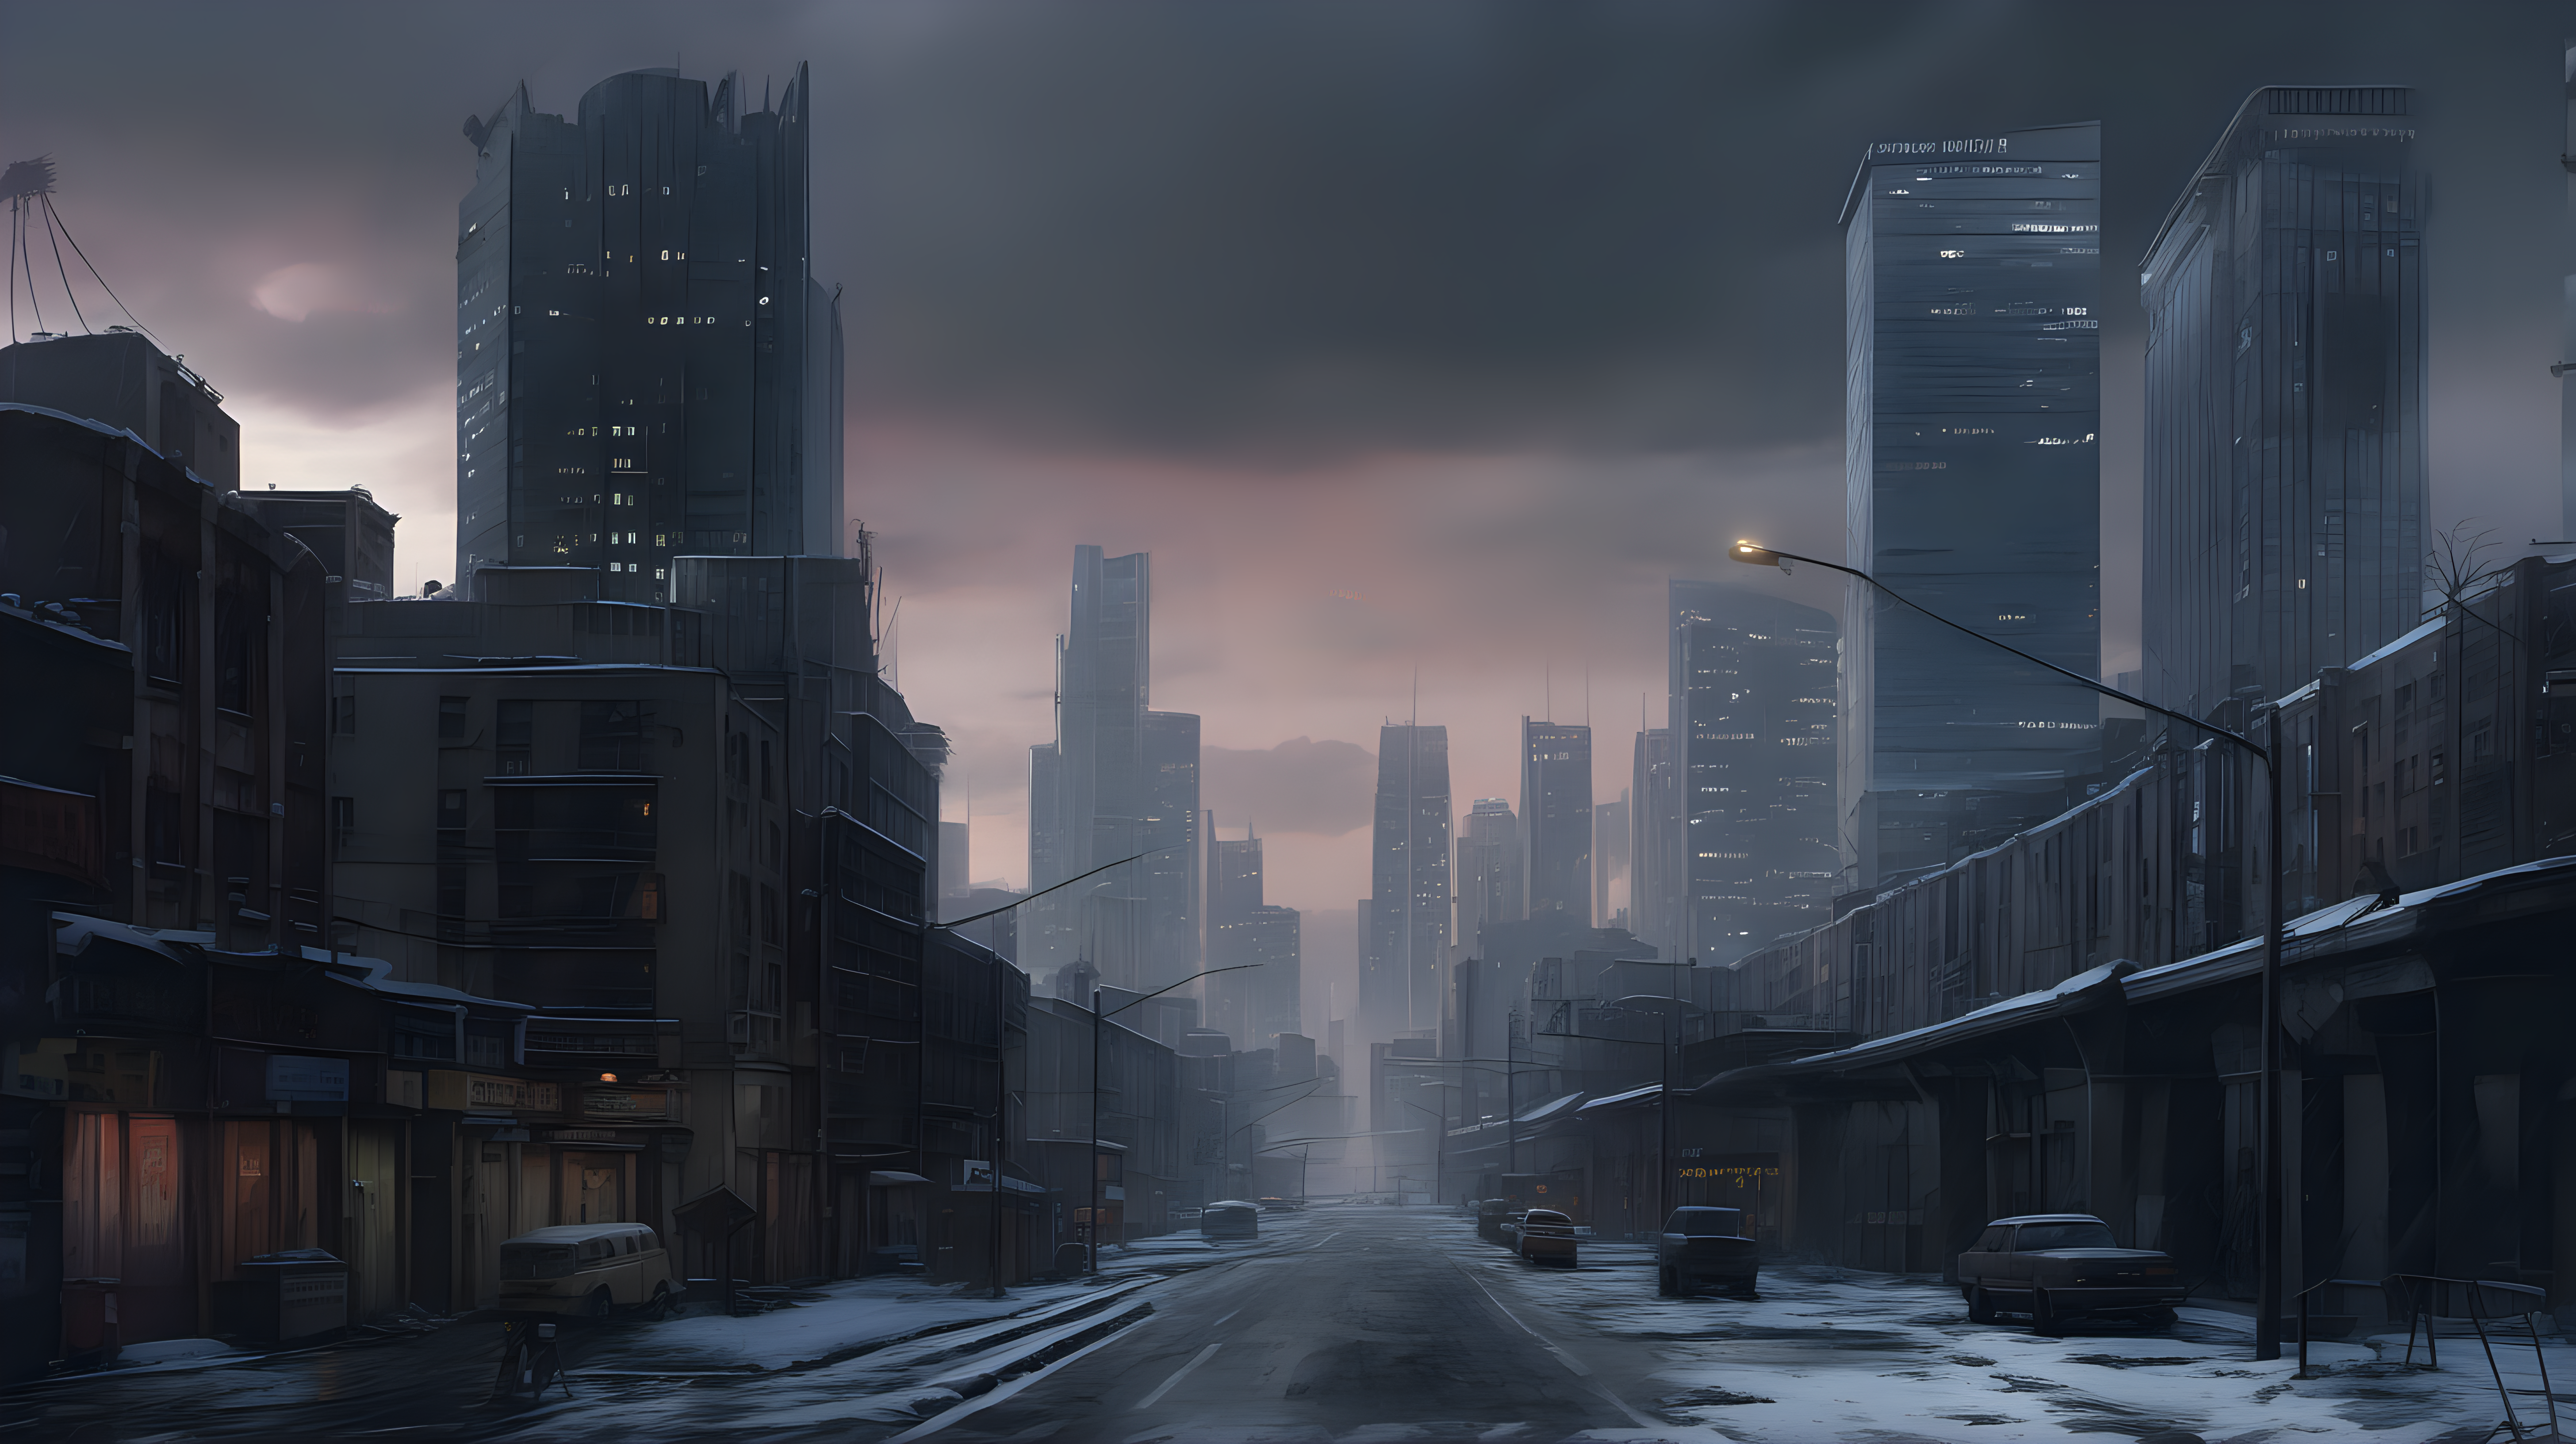 A deserted large city in winter at dusk, at ground level, skyscrapers all around, a cloudy sky, a street stretching into the distance.